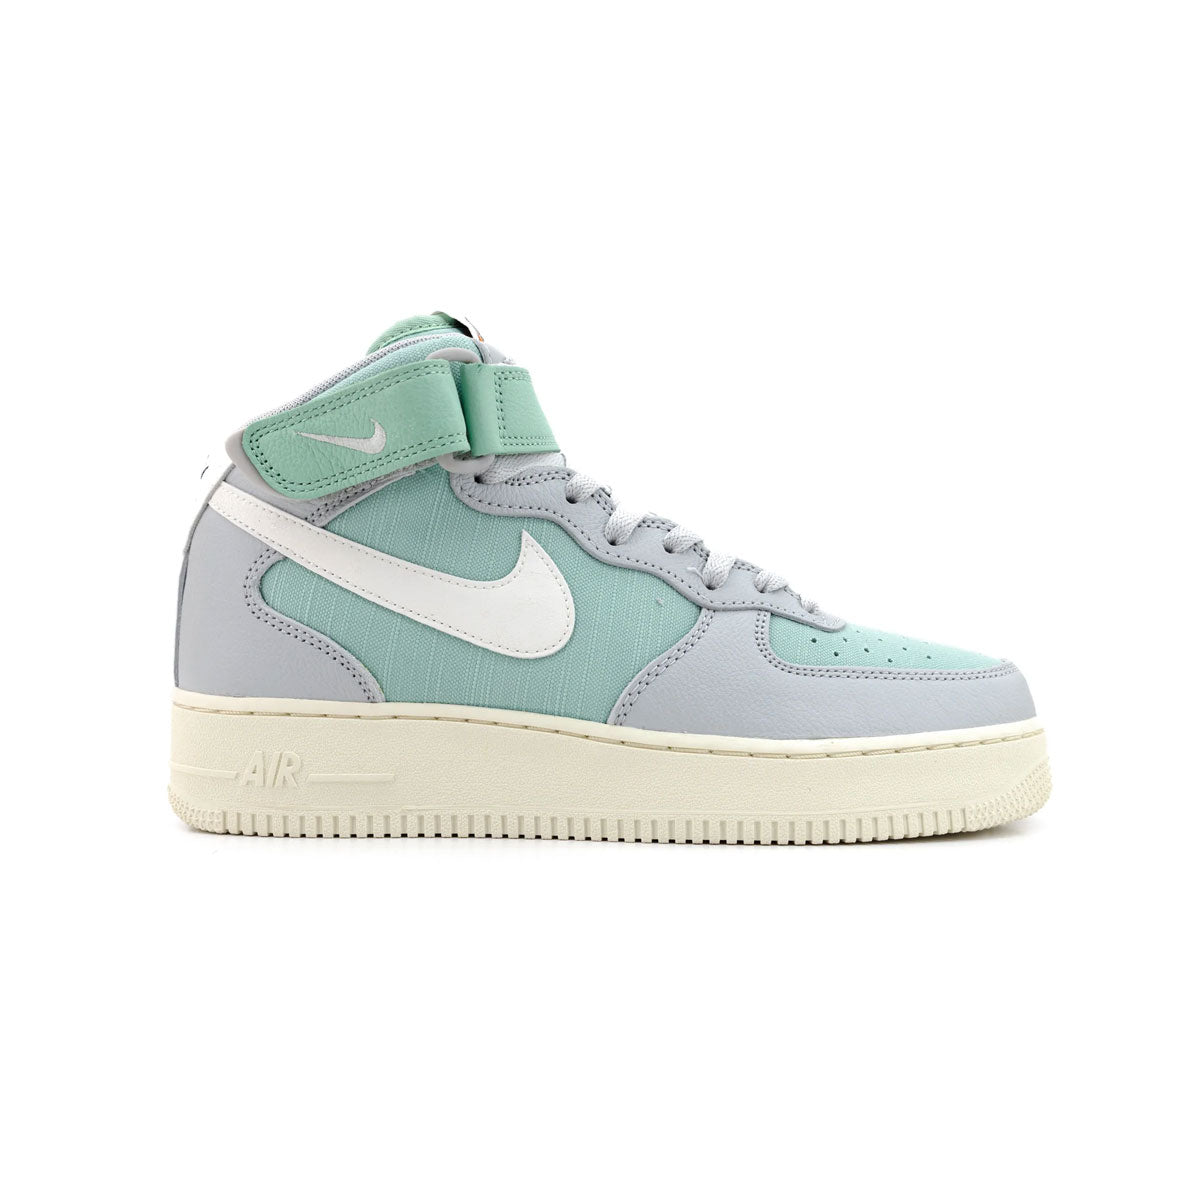 Nike Men's Air Force 1 Mid 07' LX